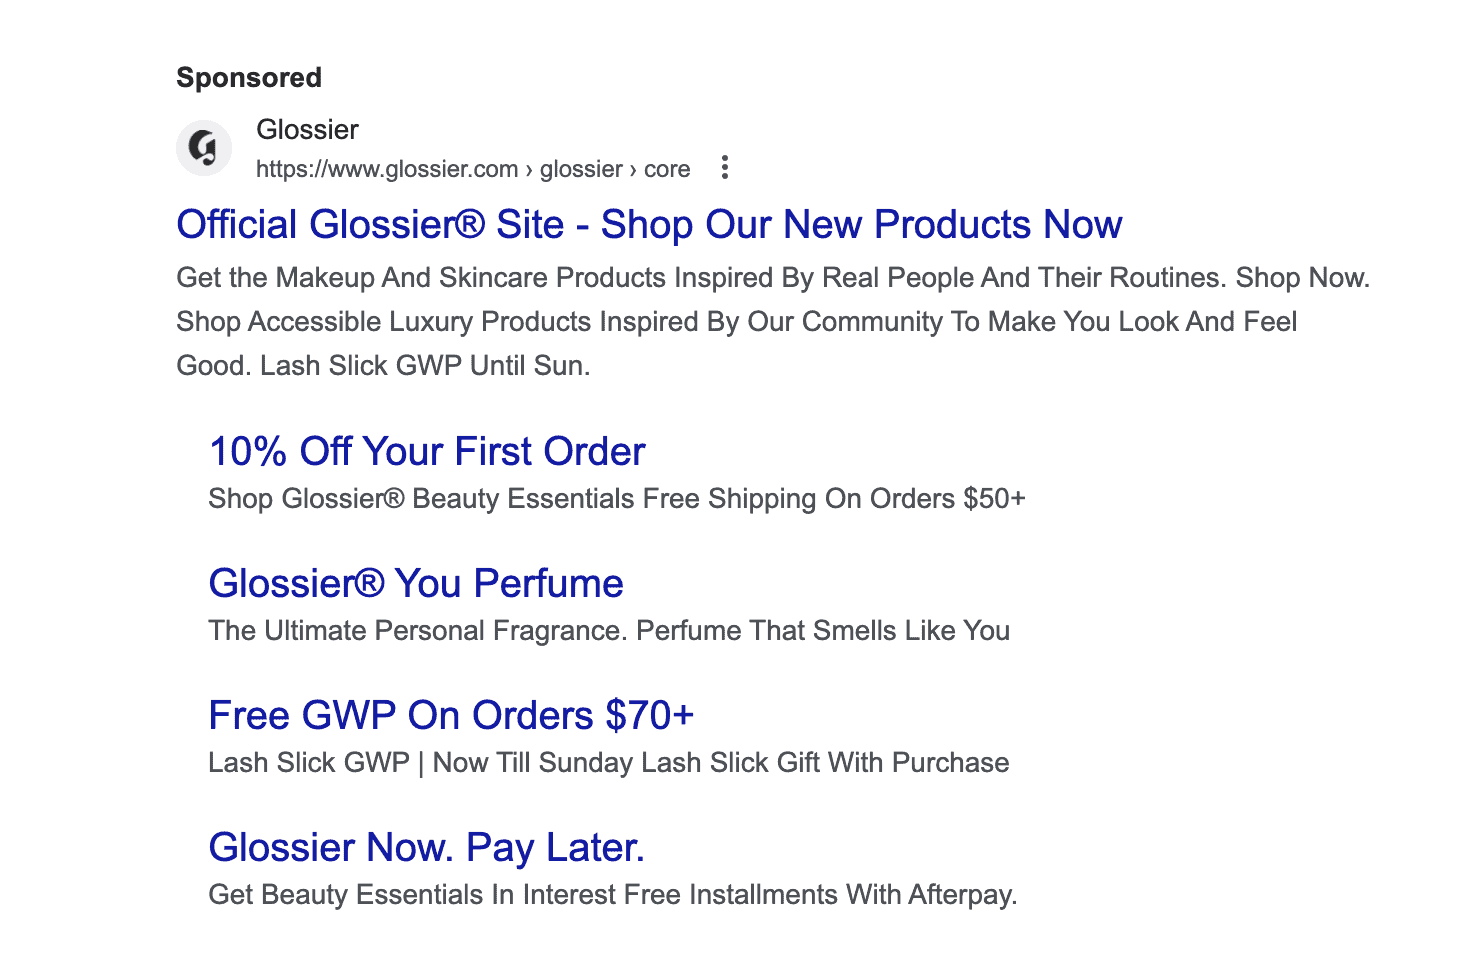 Example of effective Google Ads copy from Glossier